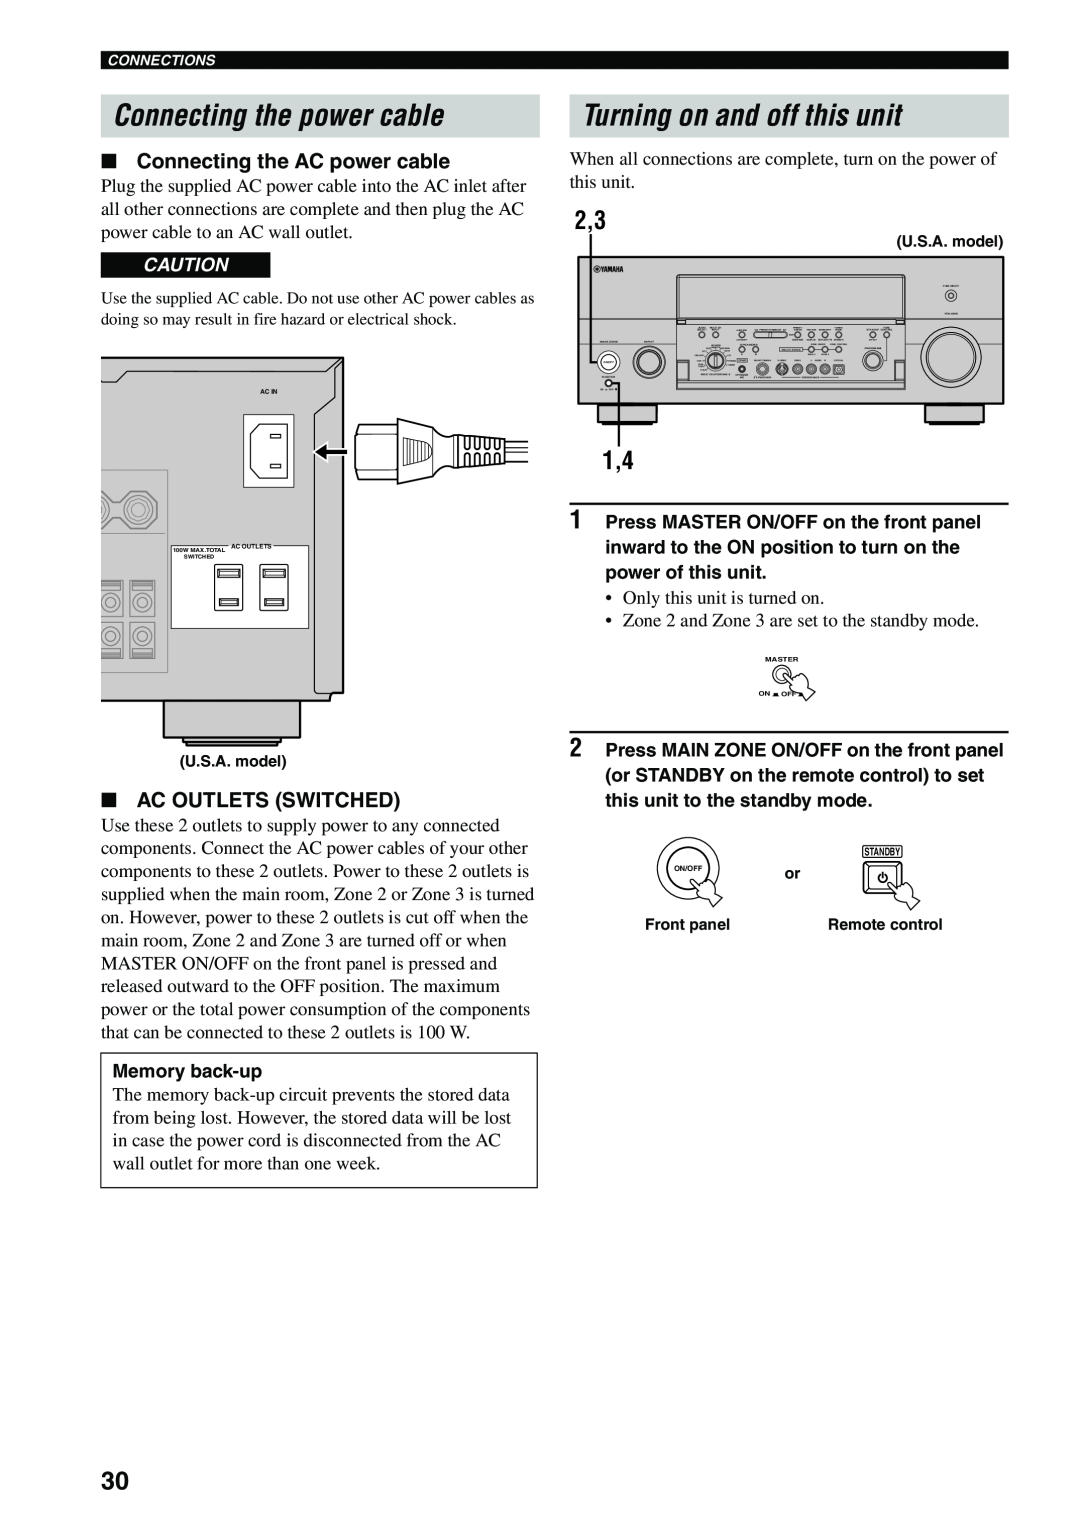 Yamaha X-V2600 owner manual Connecting the power cable, Turning on and off this unit, Connecting the AC power cable 